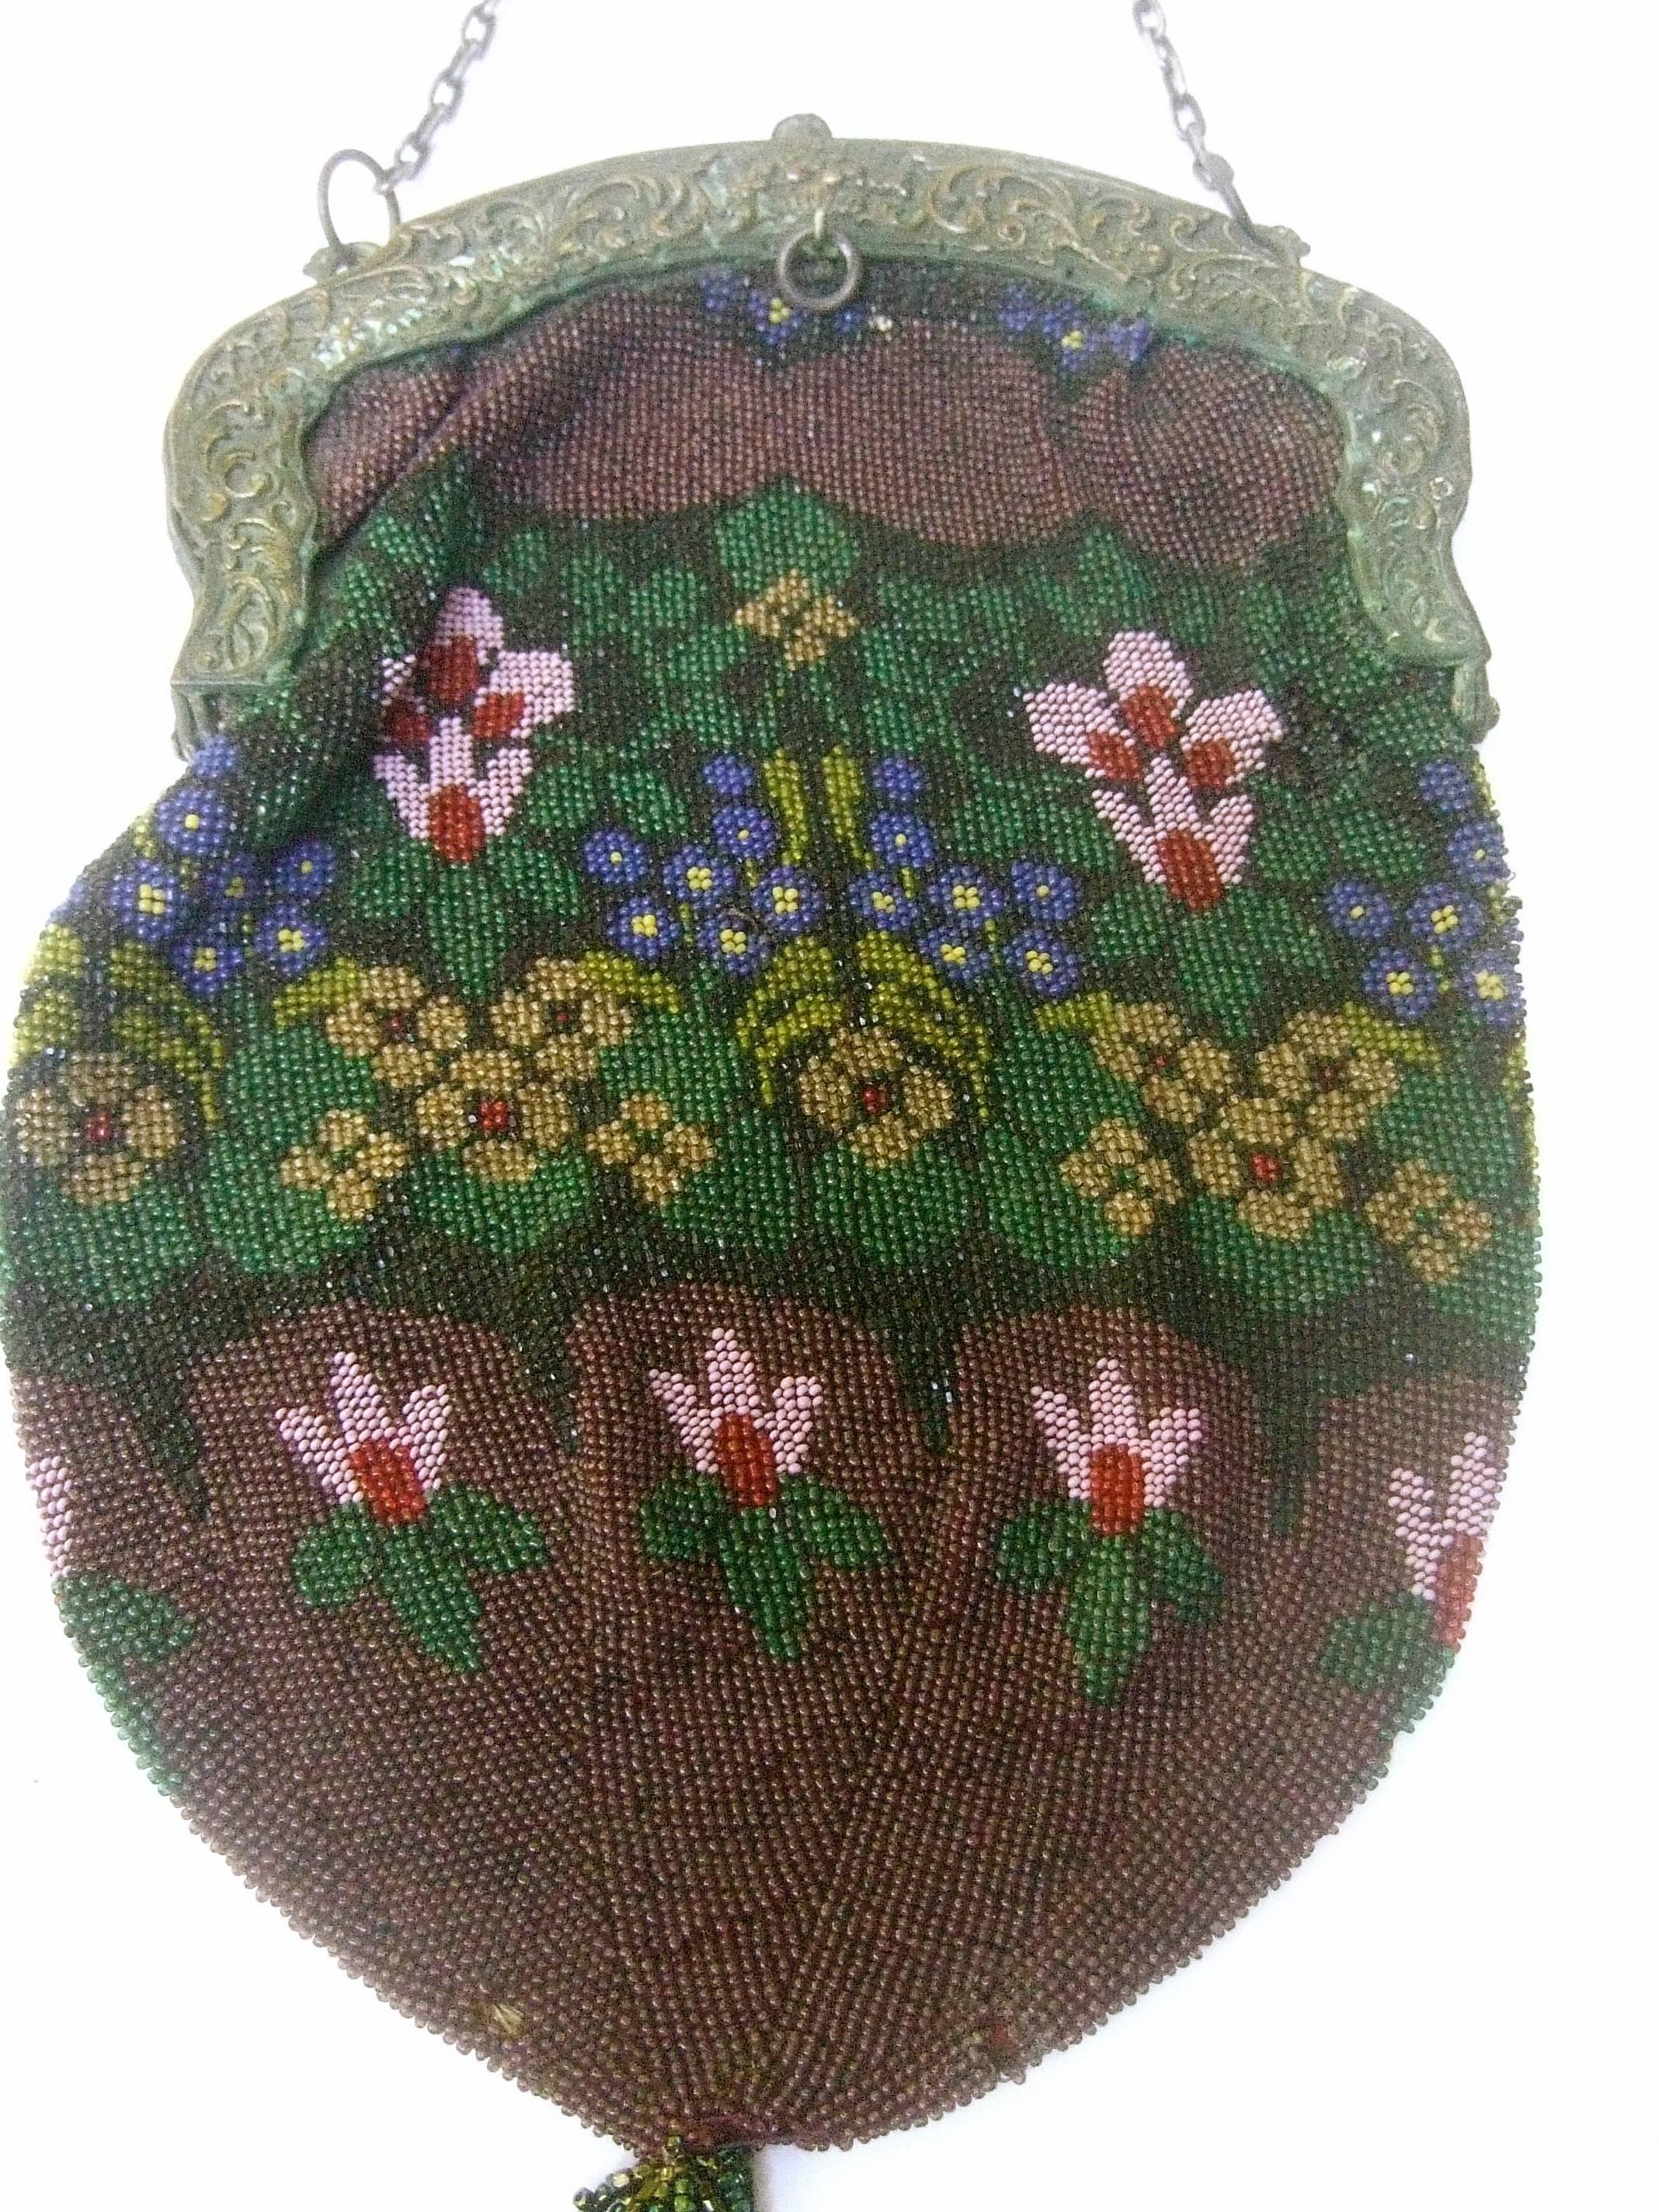 Exquisite Glass Hand Beaded Flower Evening Bag ca 1920s For Sale 1